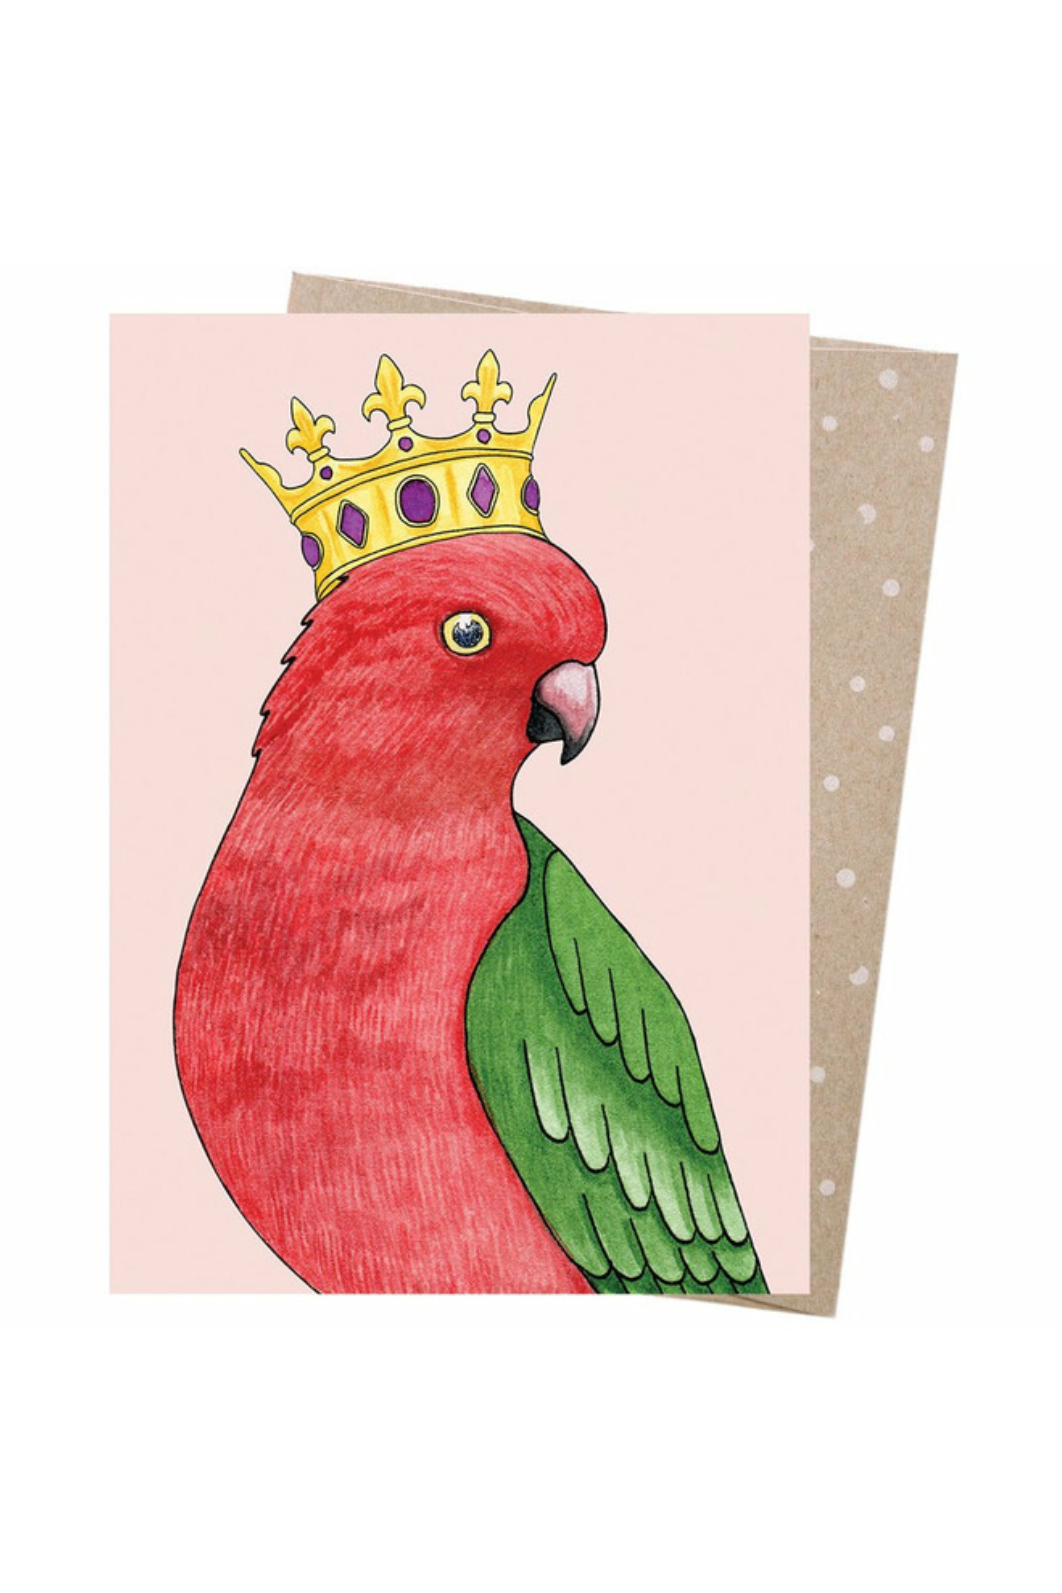 Earth Greetings Card Crowned Parrot